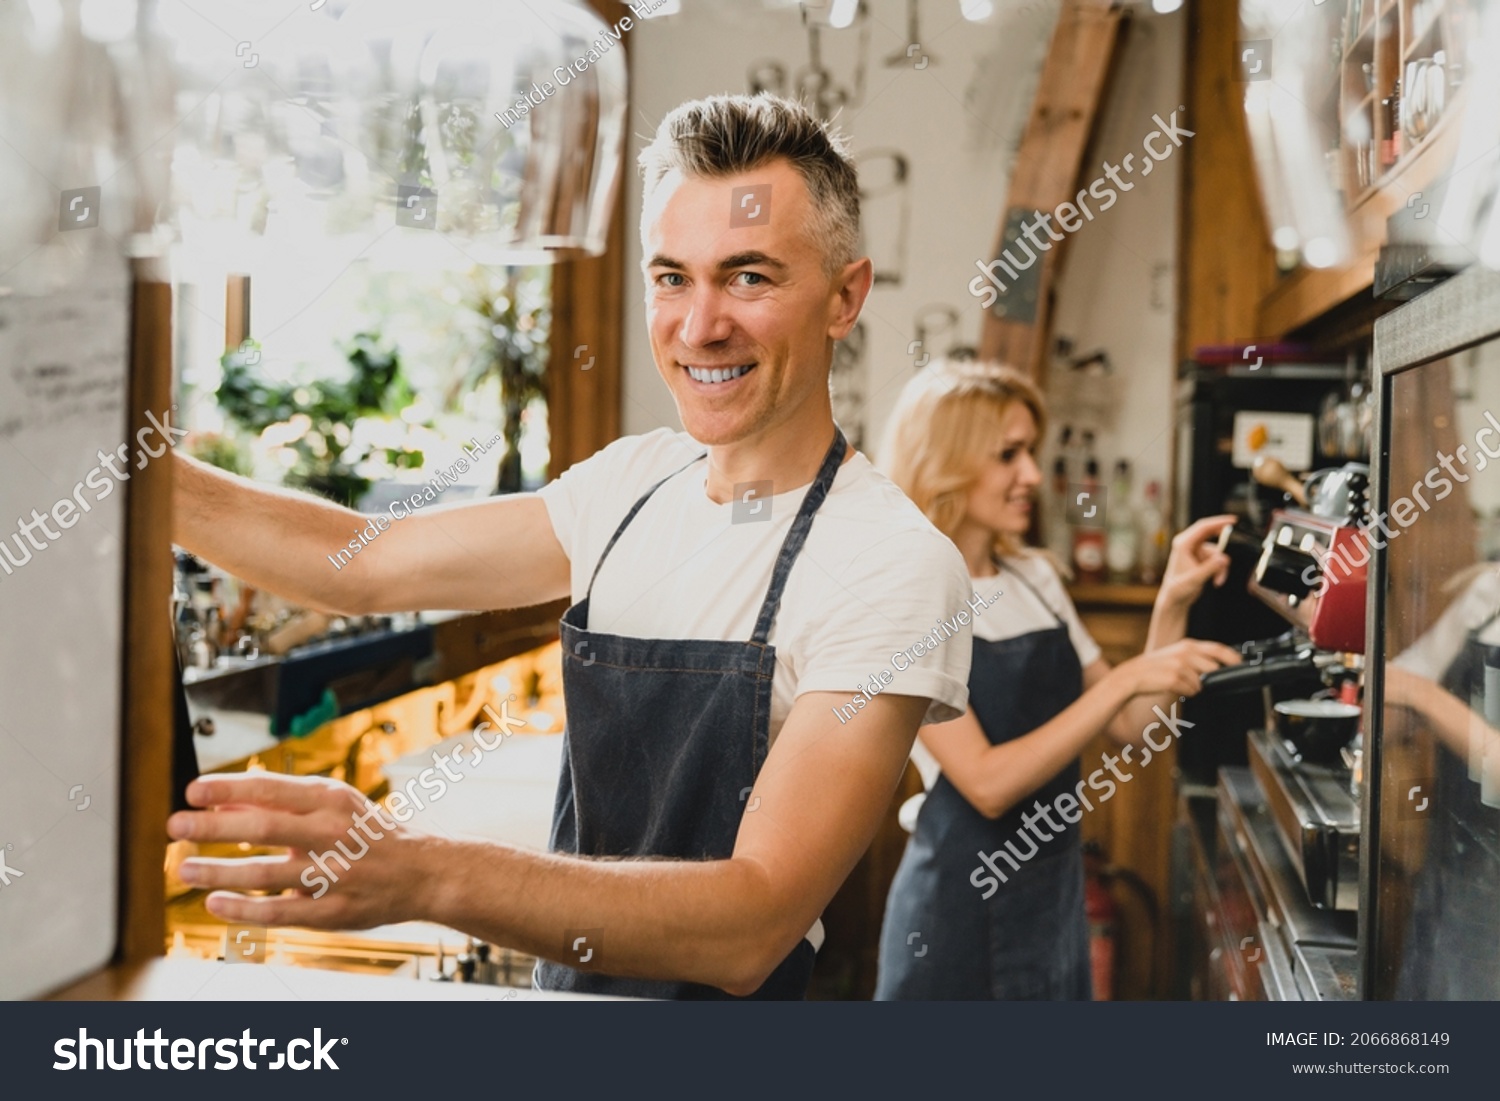 Confident smiling middle-aged small business owners barista bartenders waiters in blue aprons brewing coffee working preparing drinks orders for customers at the bar counter in restaurant cafe. #2066868149